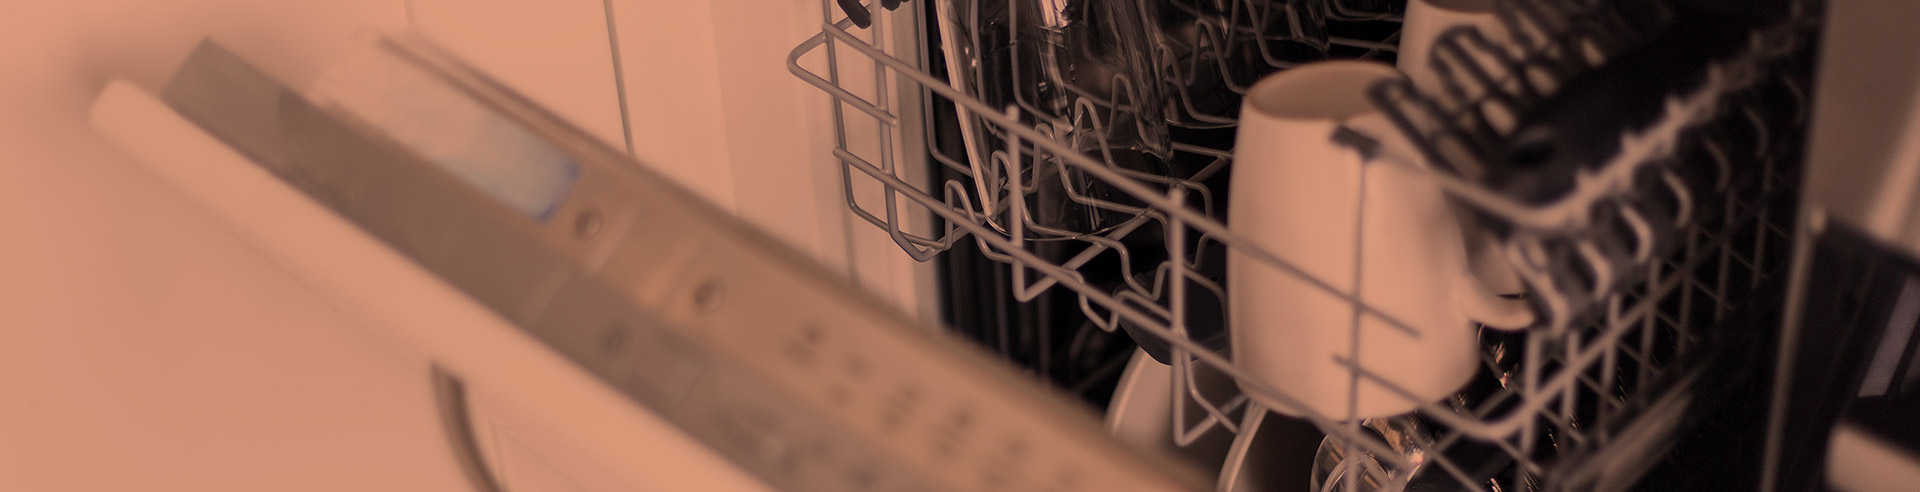 close-up-of-an-open-dishwasher-with-a-few-cups-and-plates-inside-of-it-fort-collins-co